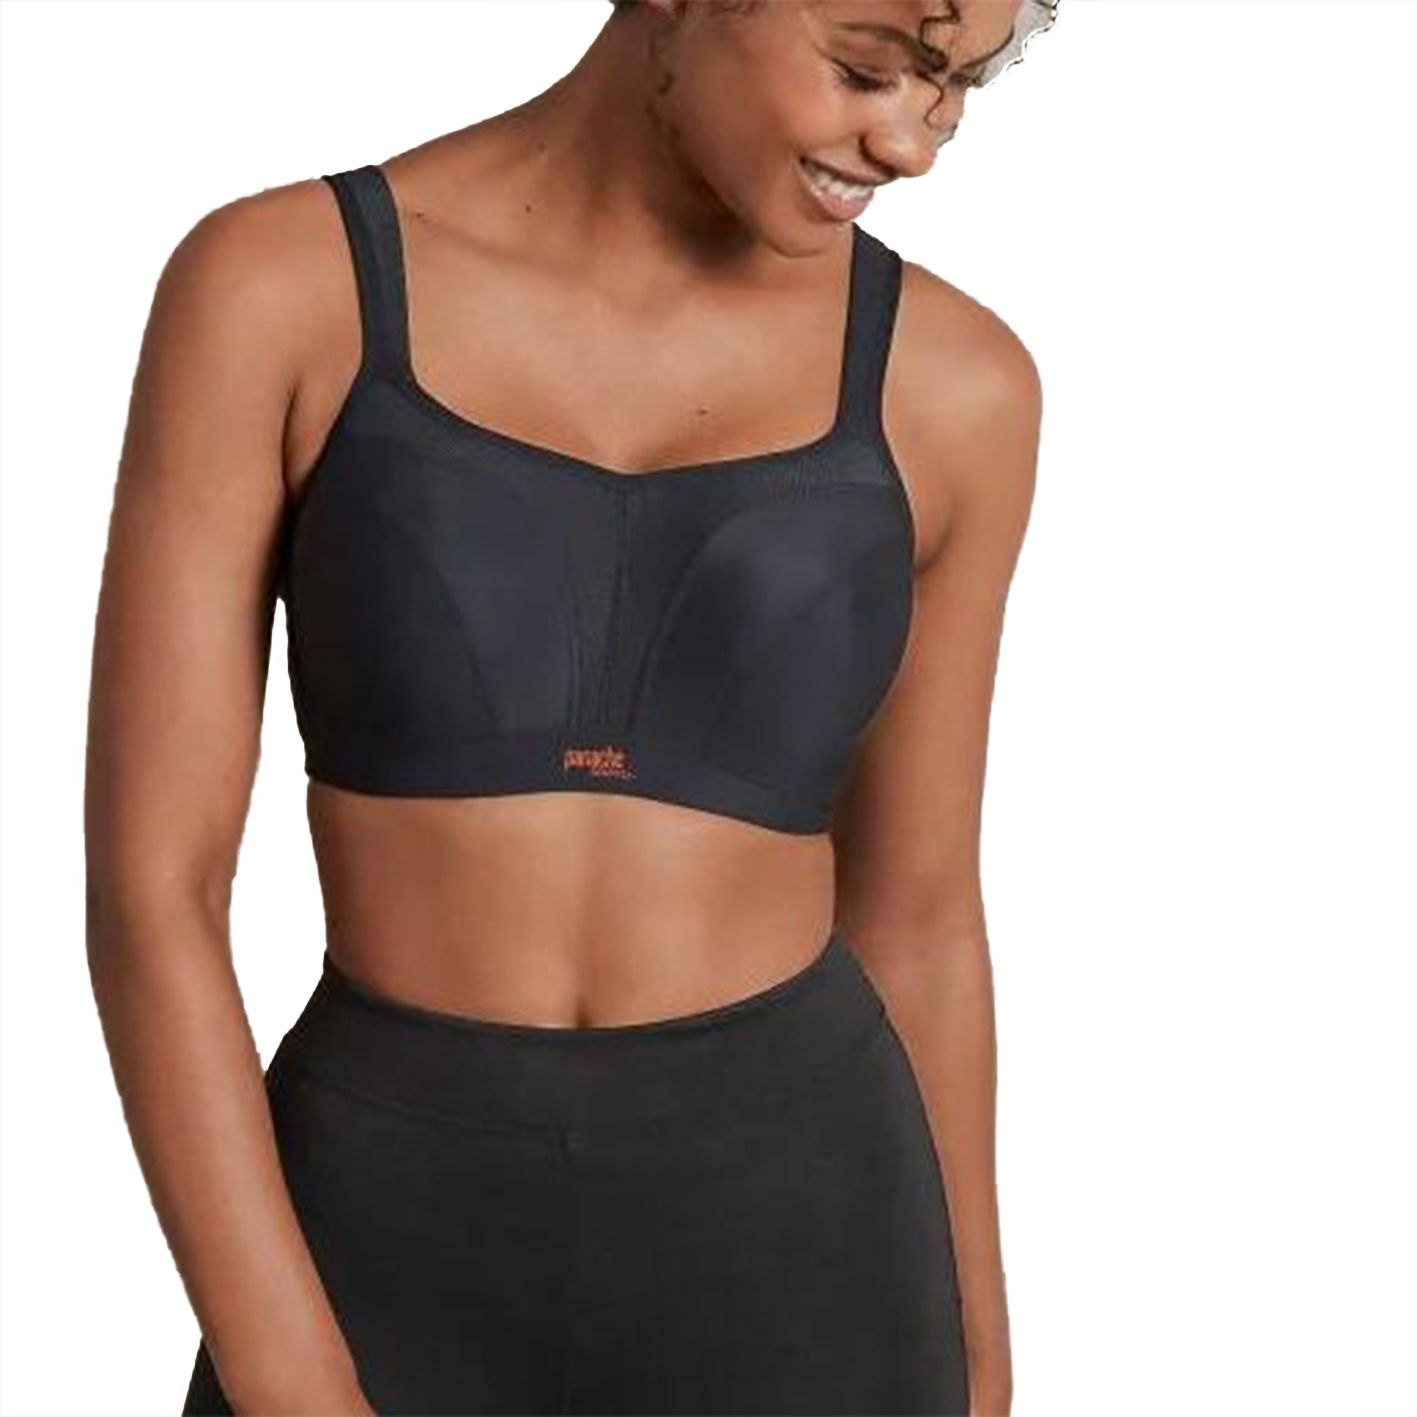 MARKS & SPENCER M&S HIGH IMPACT PADDED NON-WIRED GREY SPORTS BRA 32 38 A D DD # 